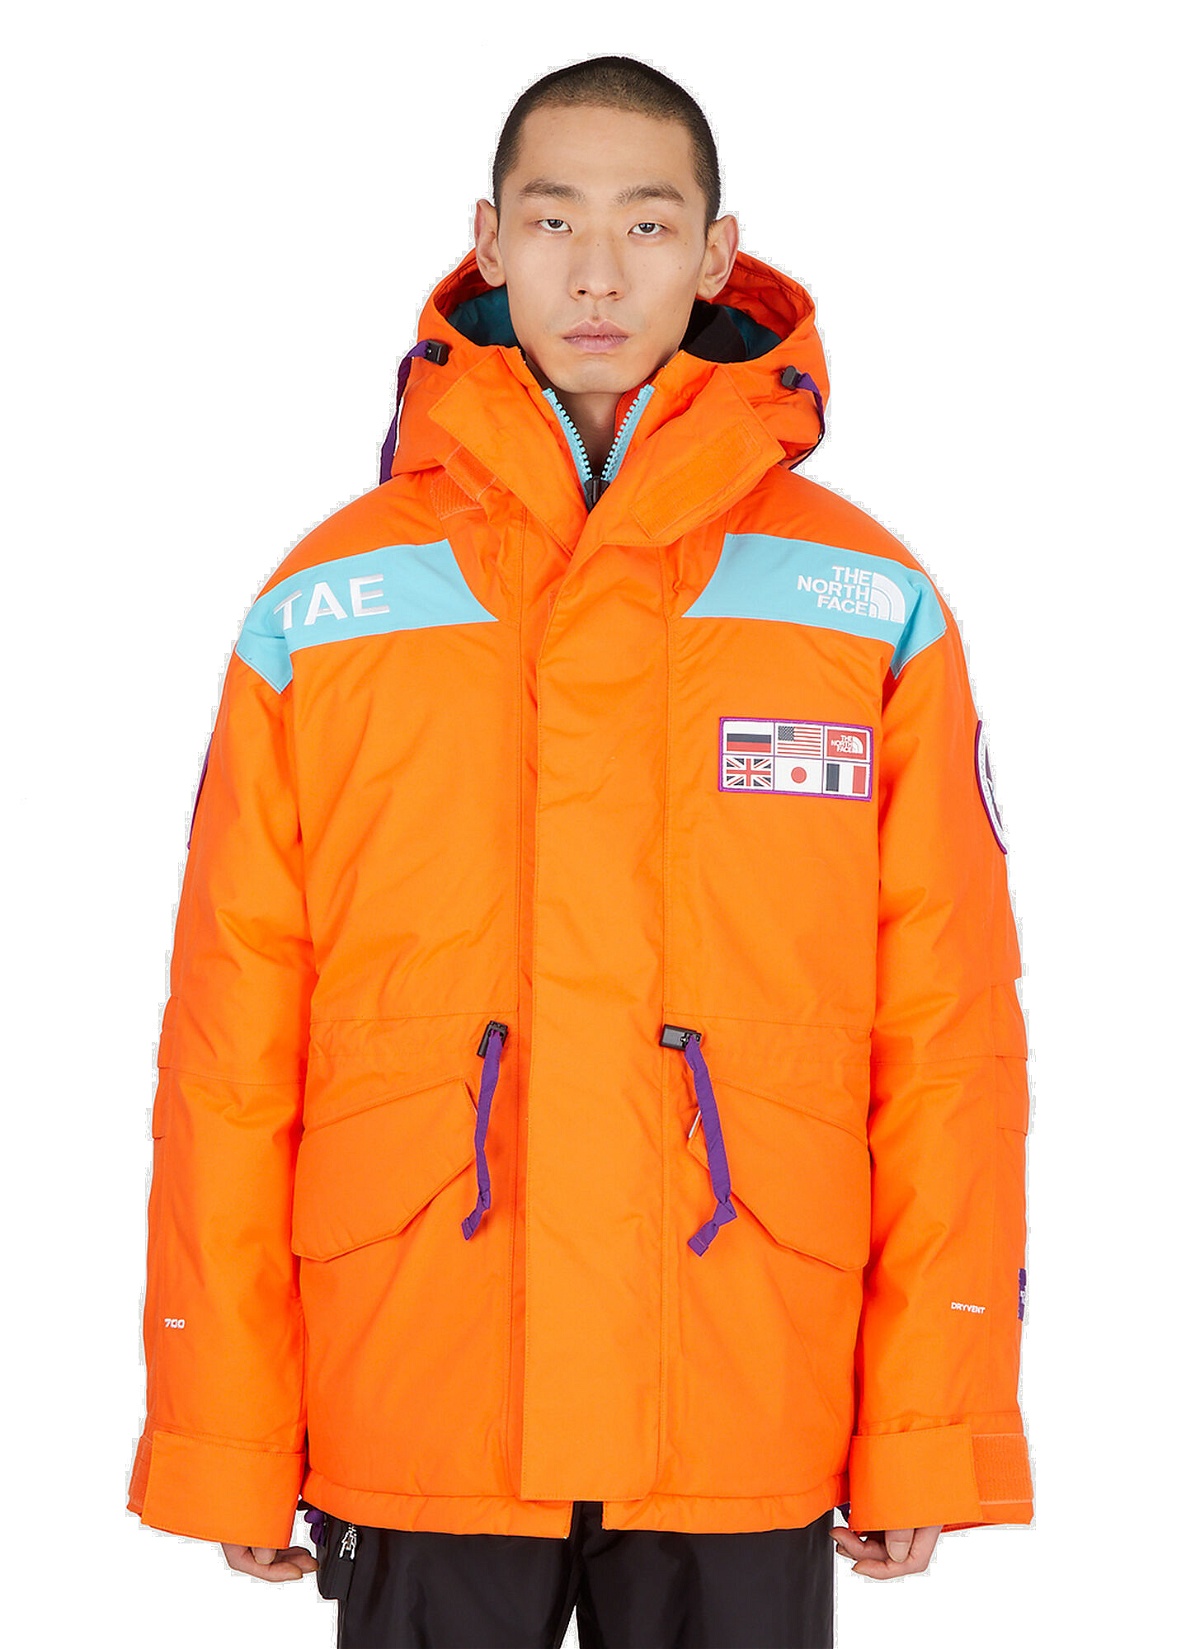 Expedition Trans North The Orange Jacket Antarctica Face in